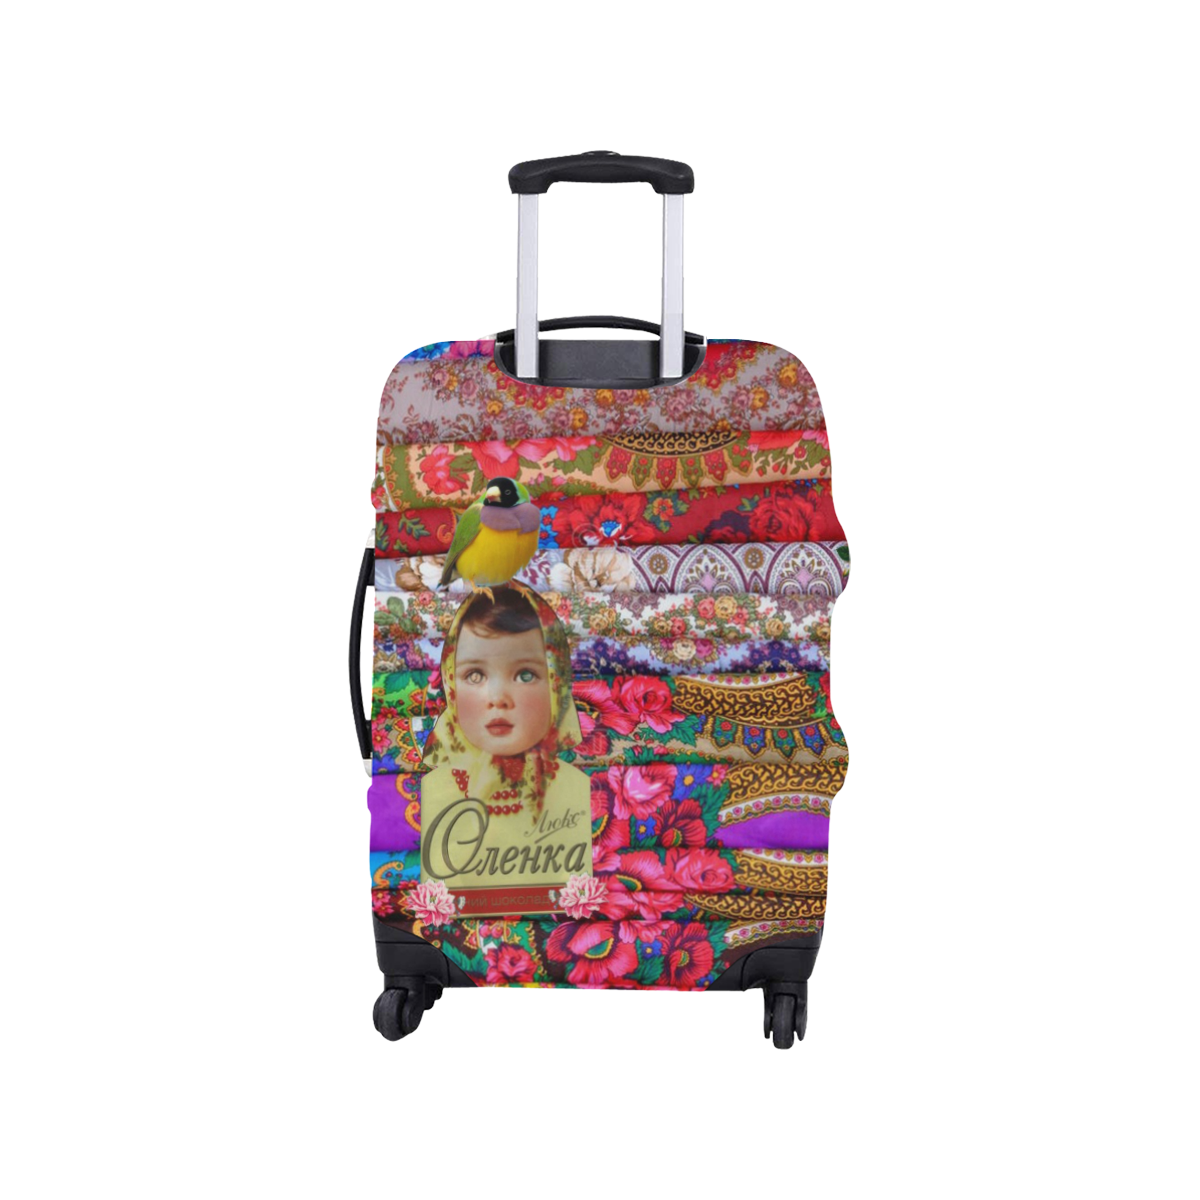 Flower Child Luggage Cover/Small 18"-21"